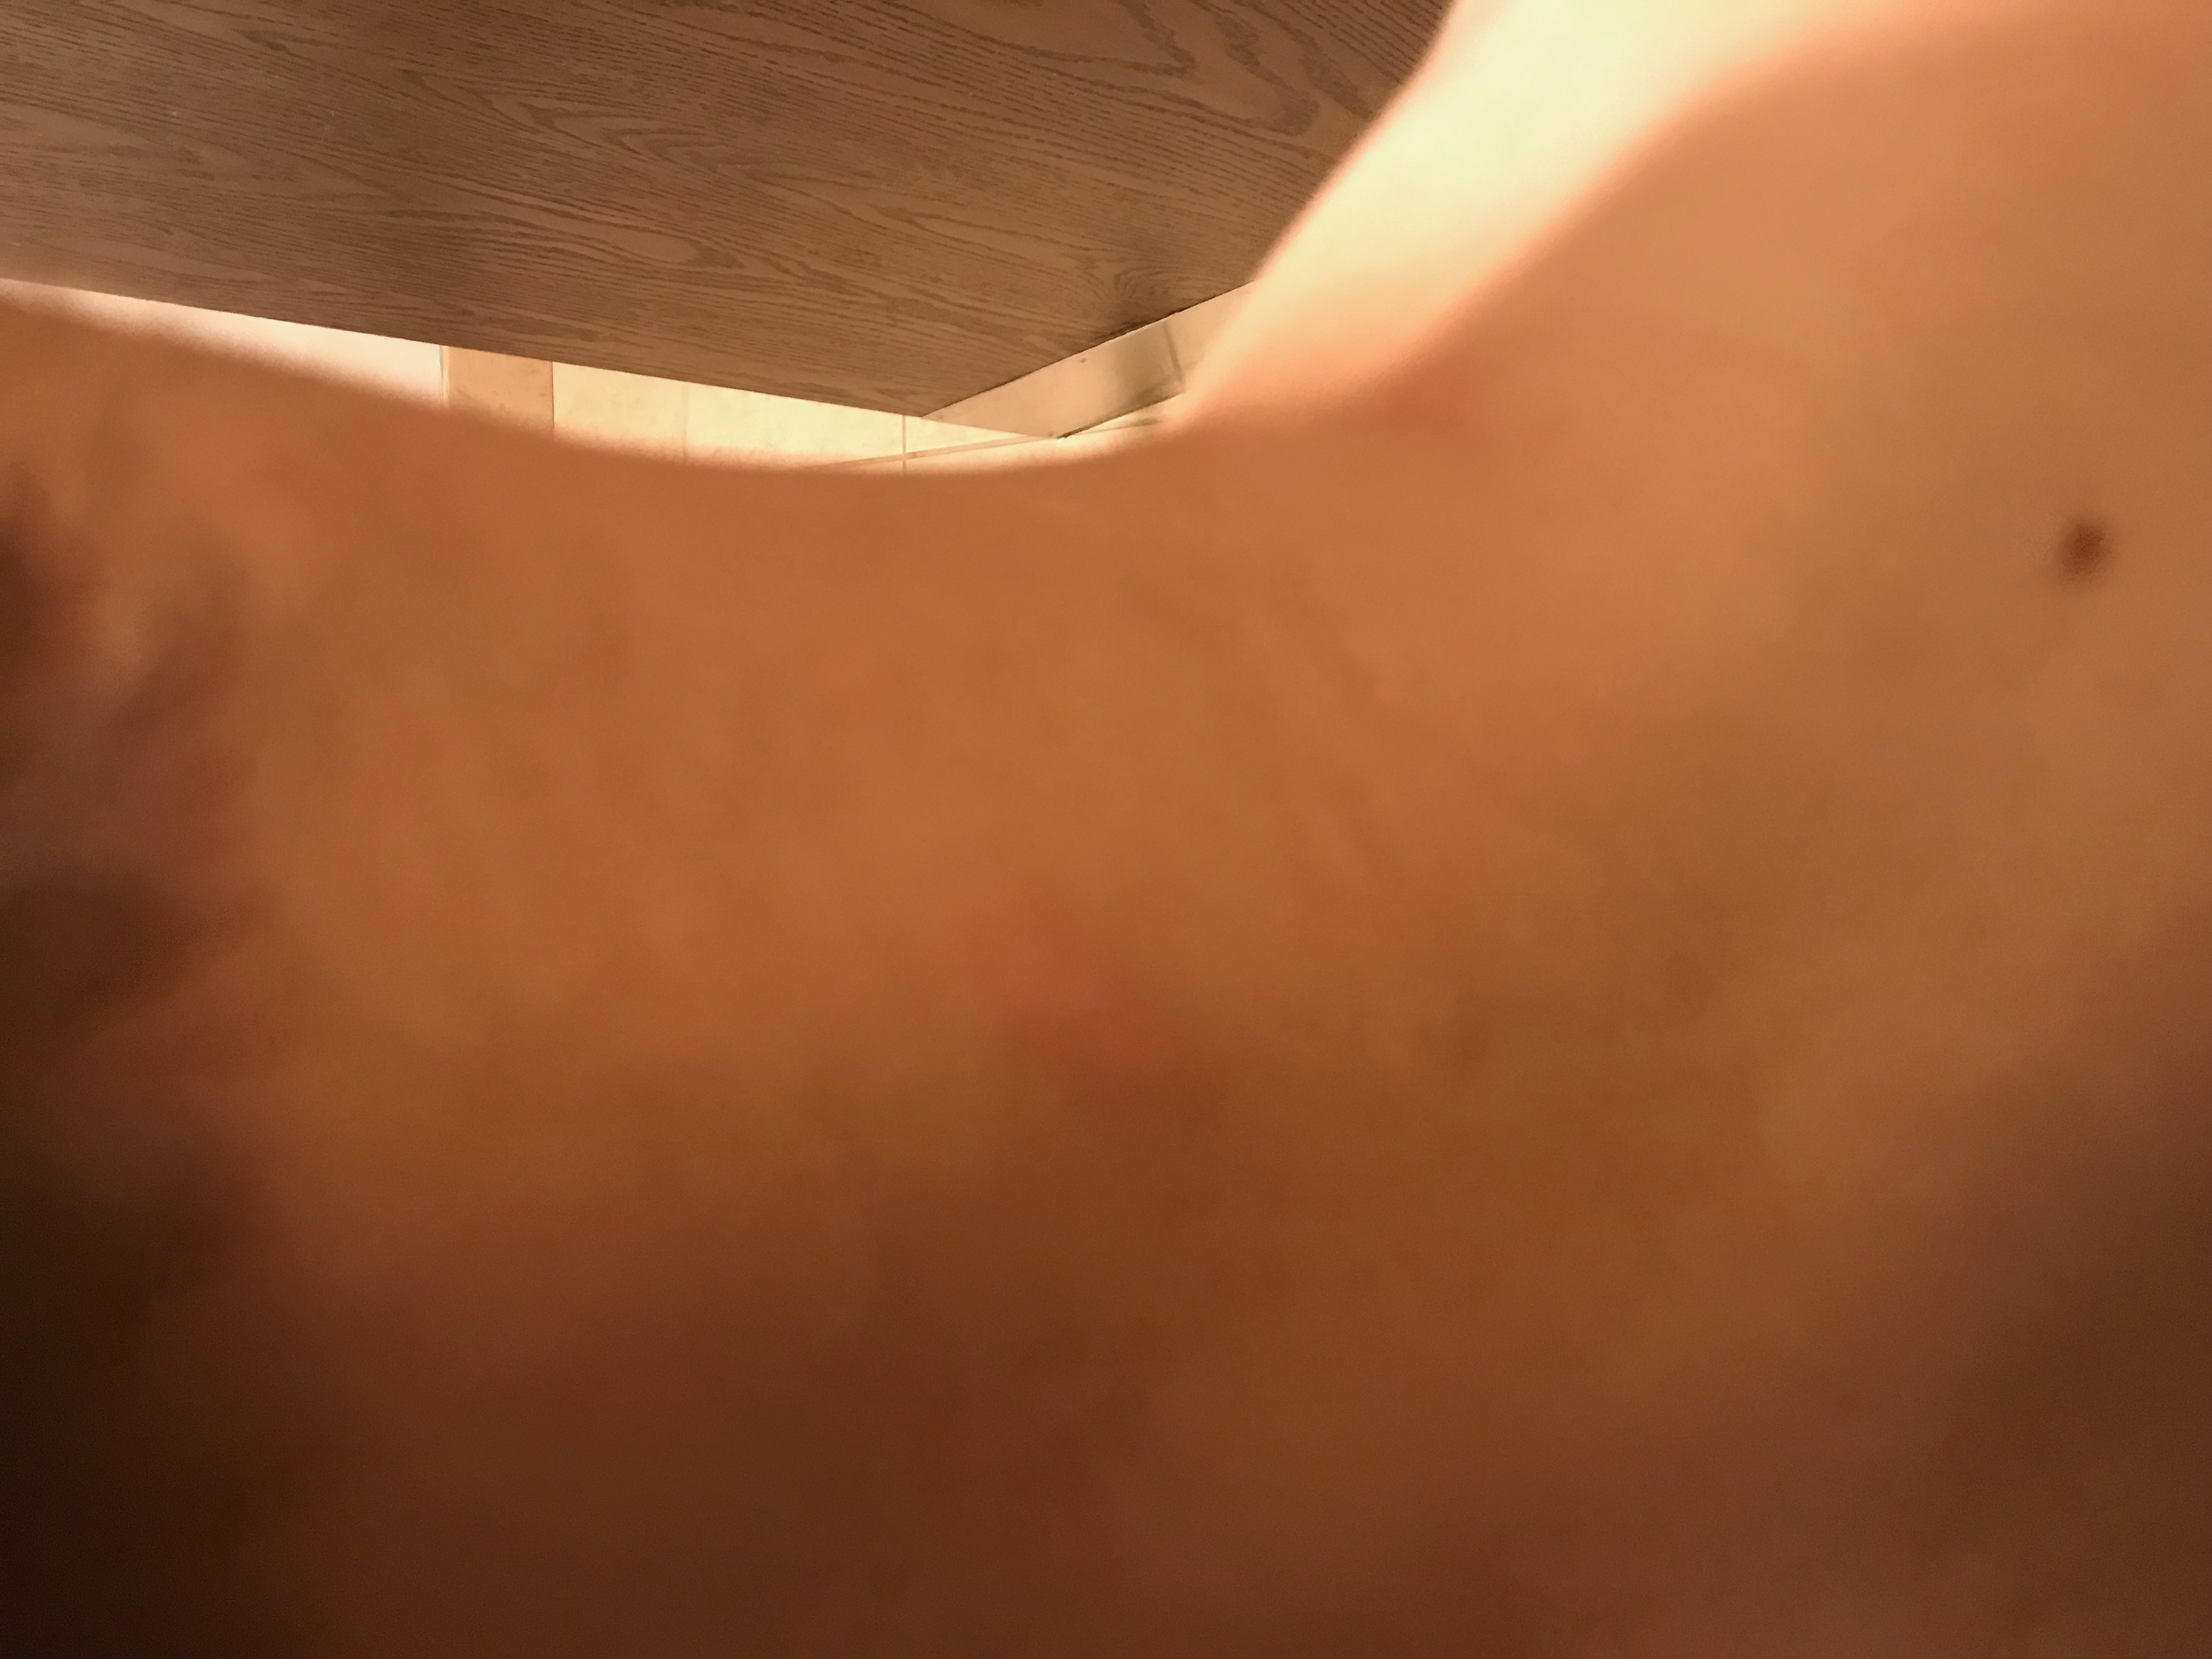 Bug bite on neck from BW hotel